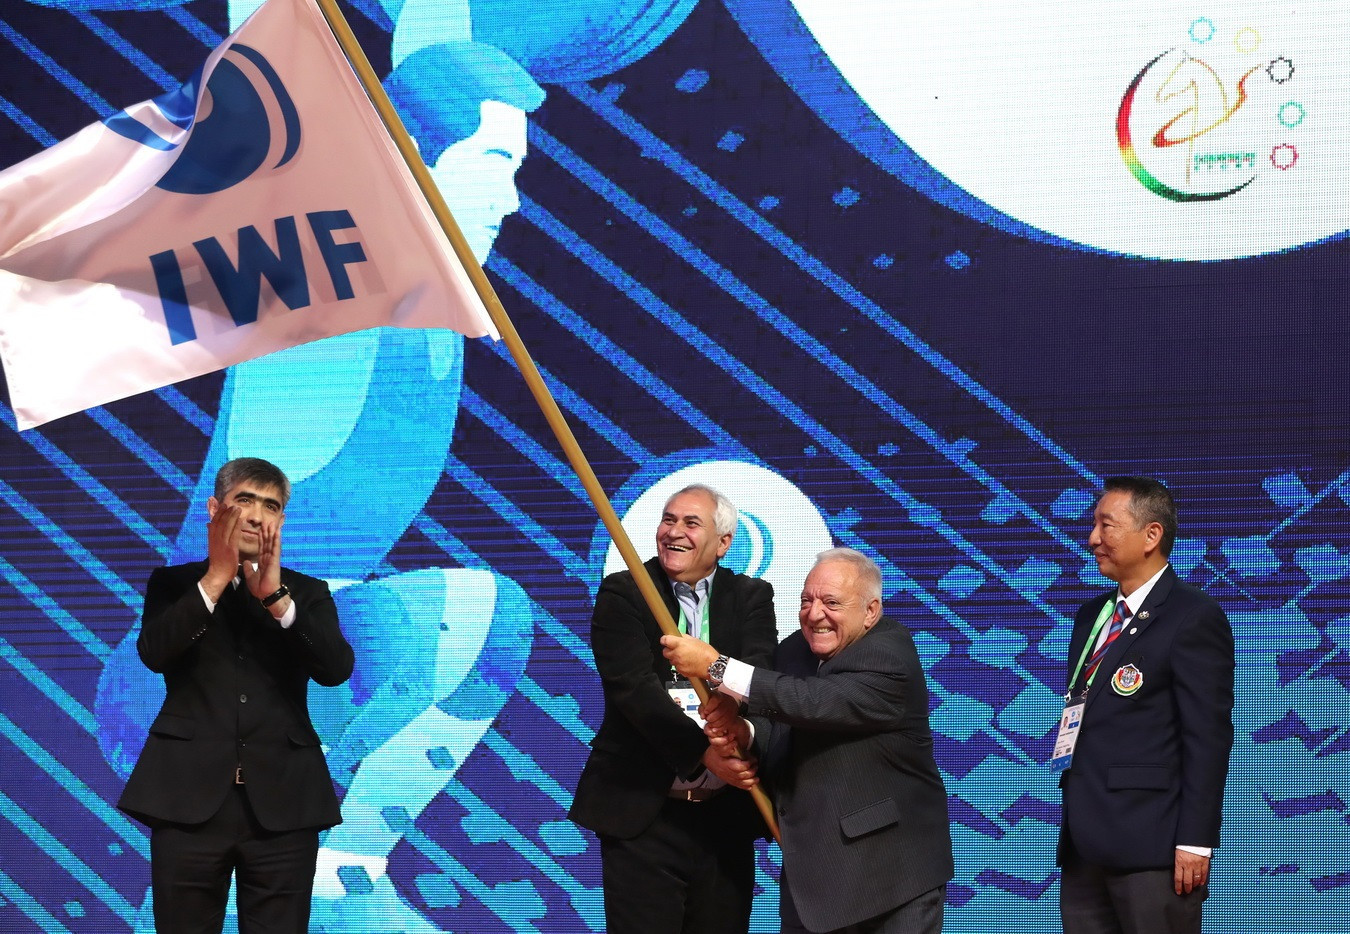 IWF President Tamás Aján took part in the flag handover ceremony as attention turns to the 2019 World Championships in Pattaya in Thailand ©IWF